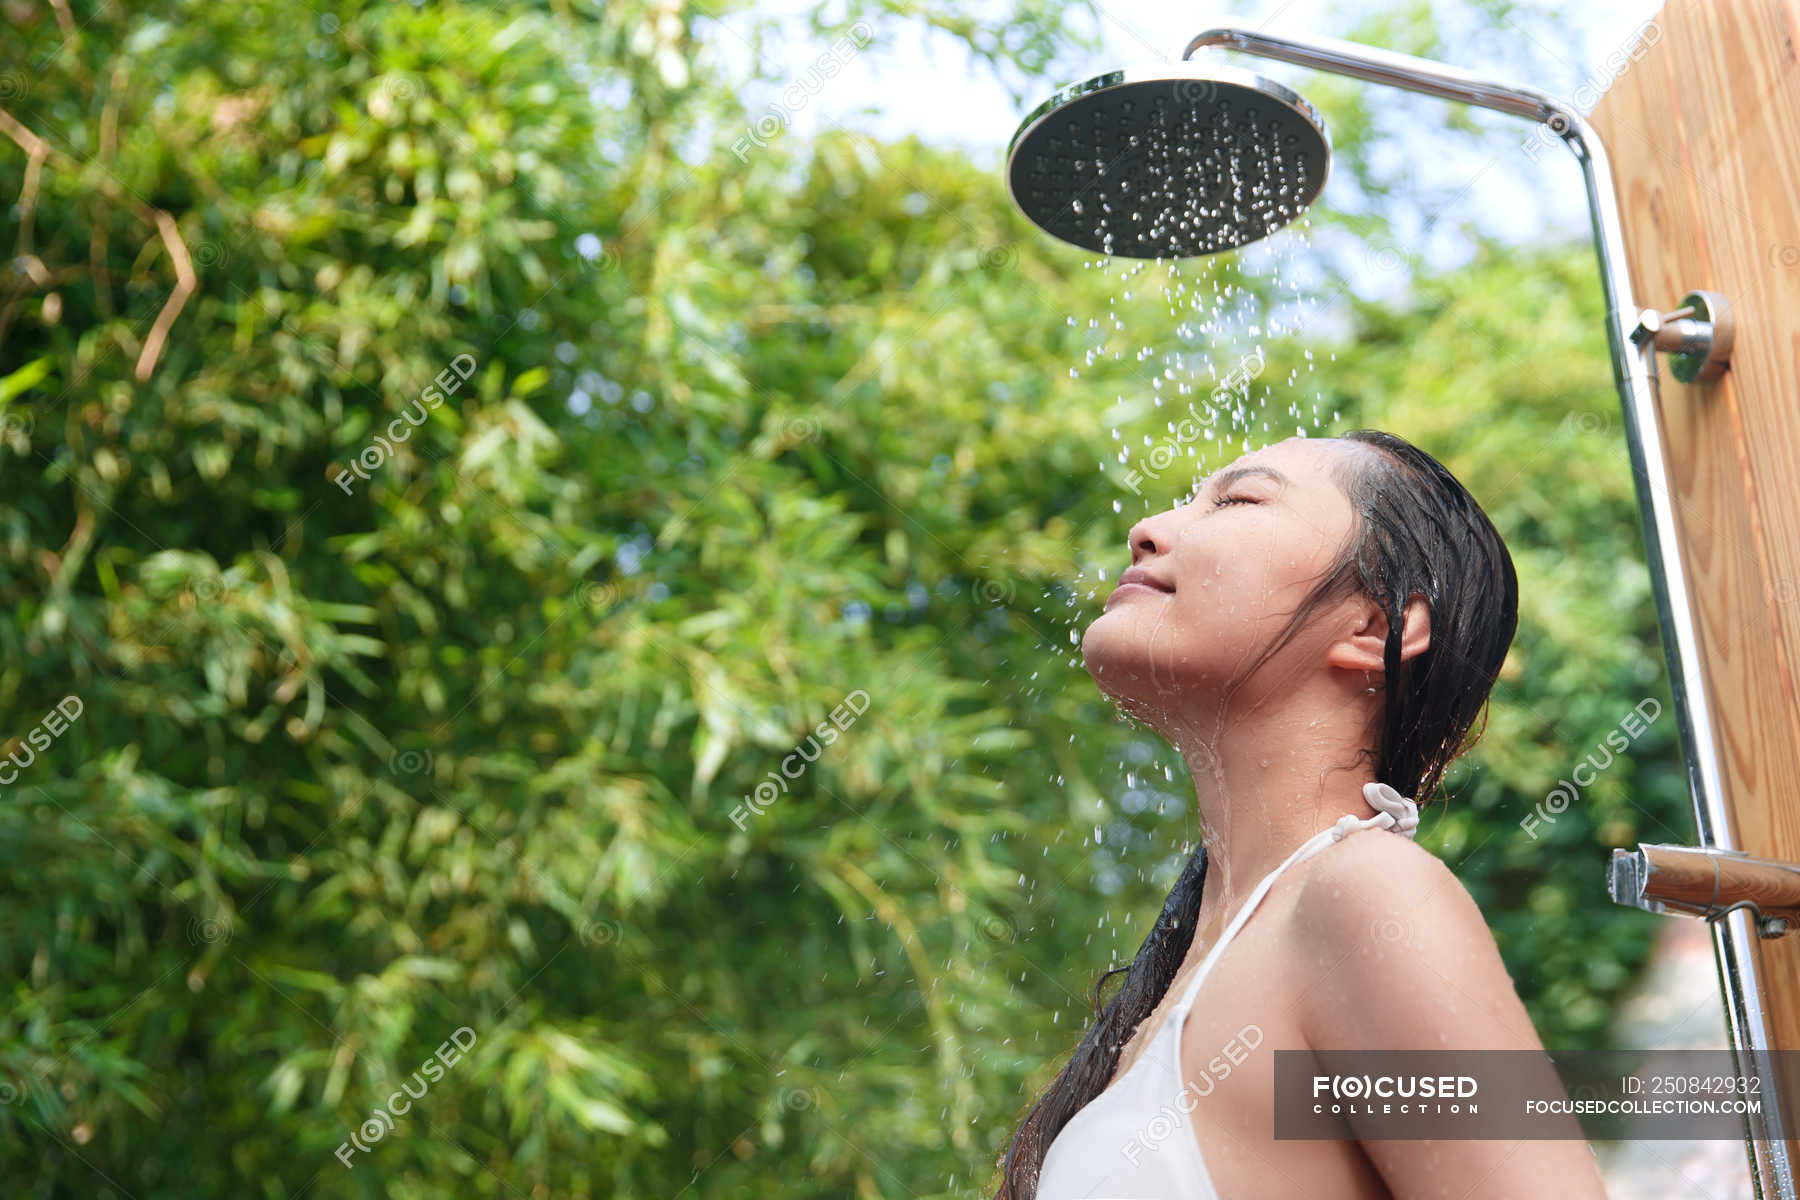 Low Angle View Of Smiling Young Woman In Bikini Taking Shower With Closed Eyes — Enjoying Body